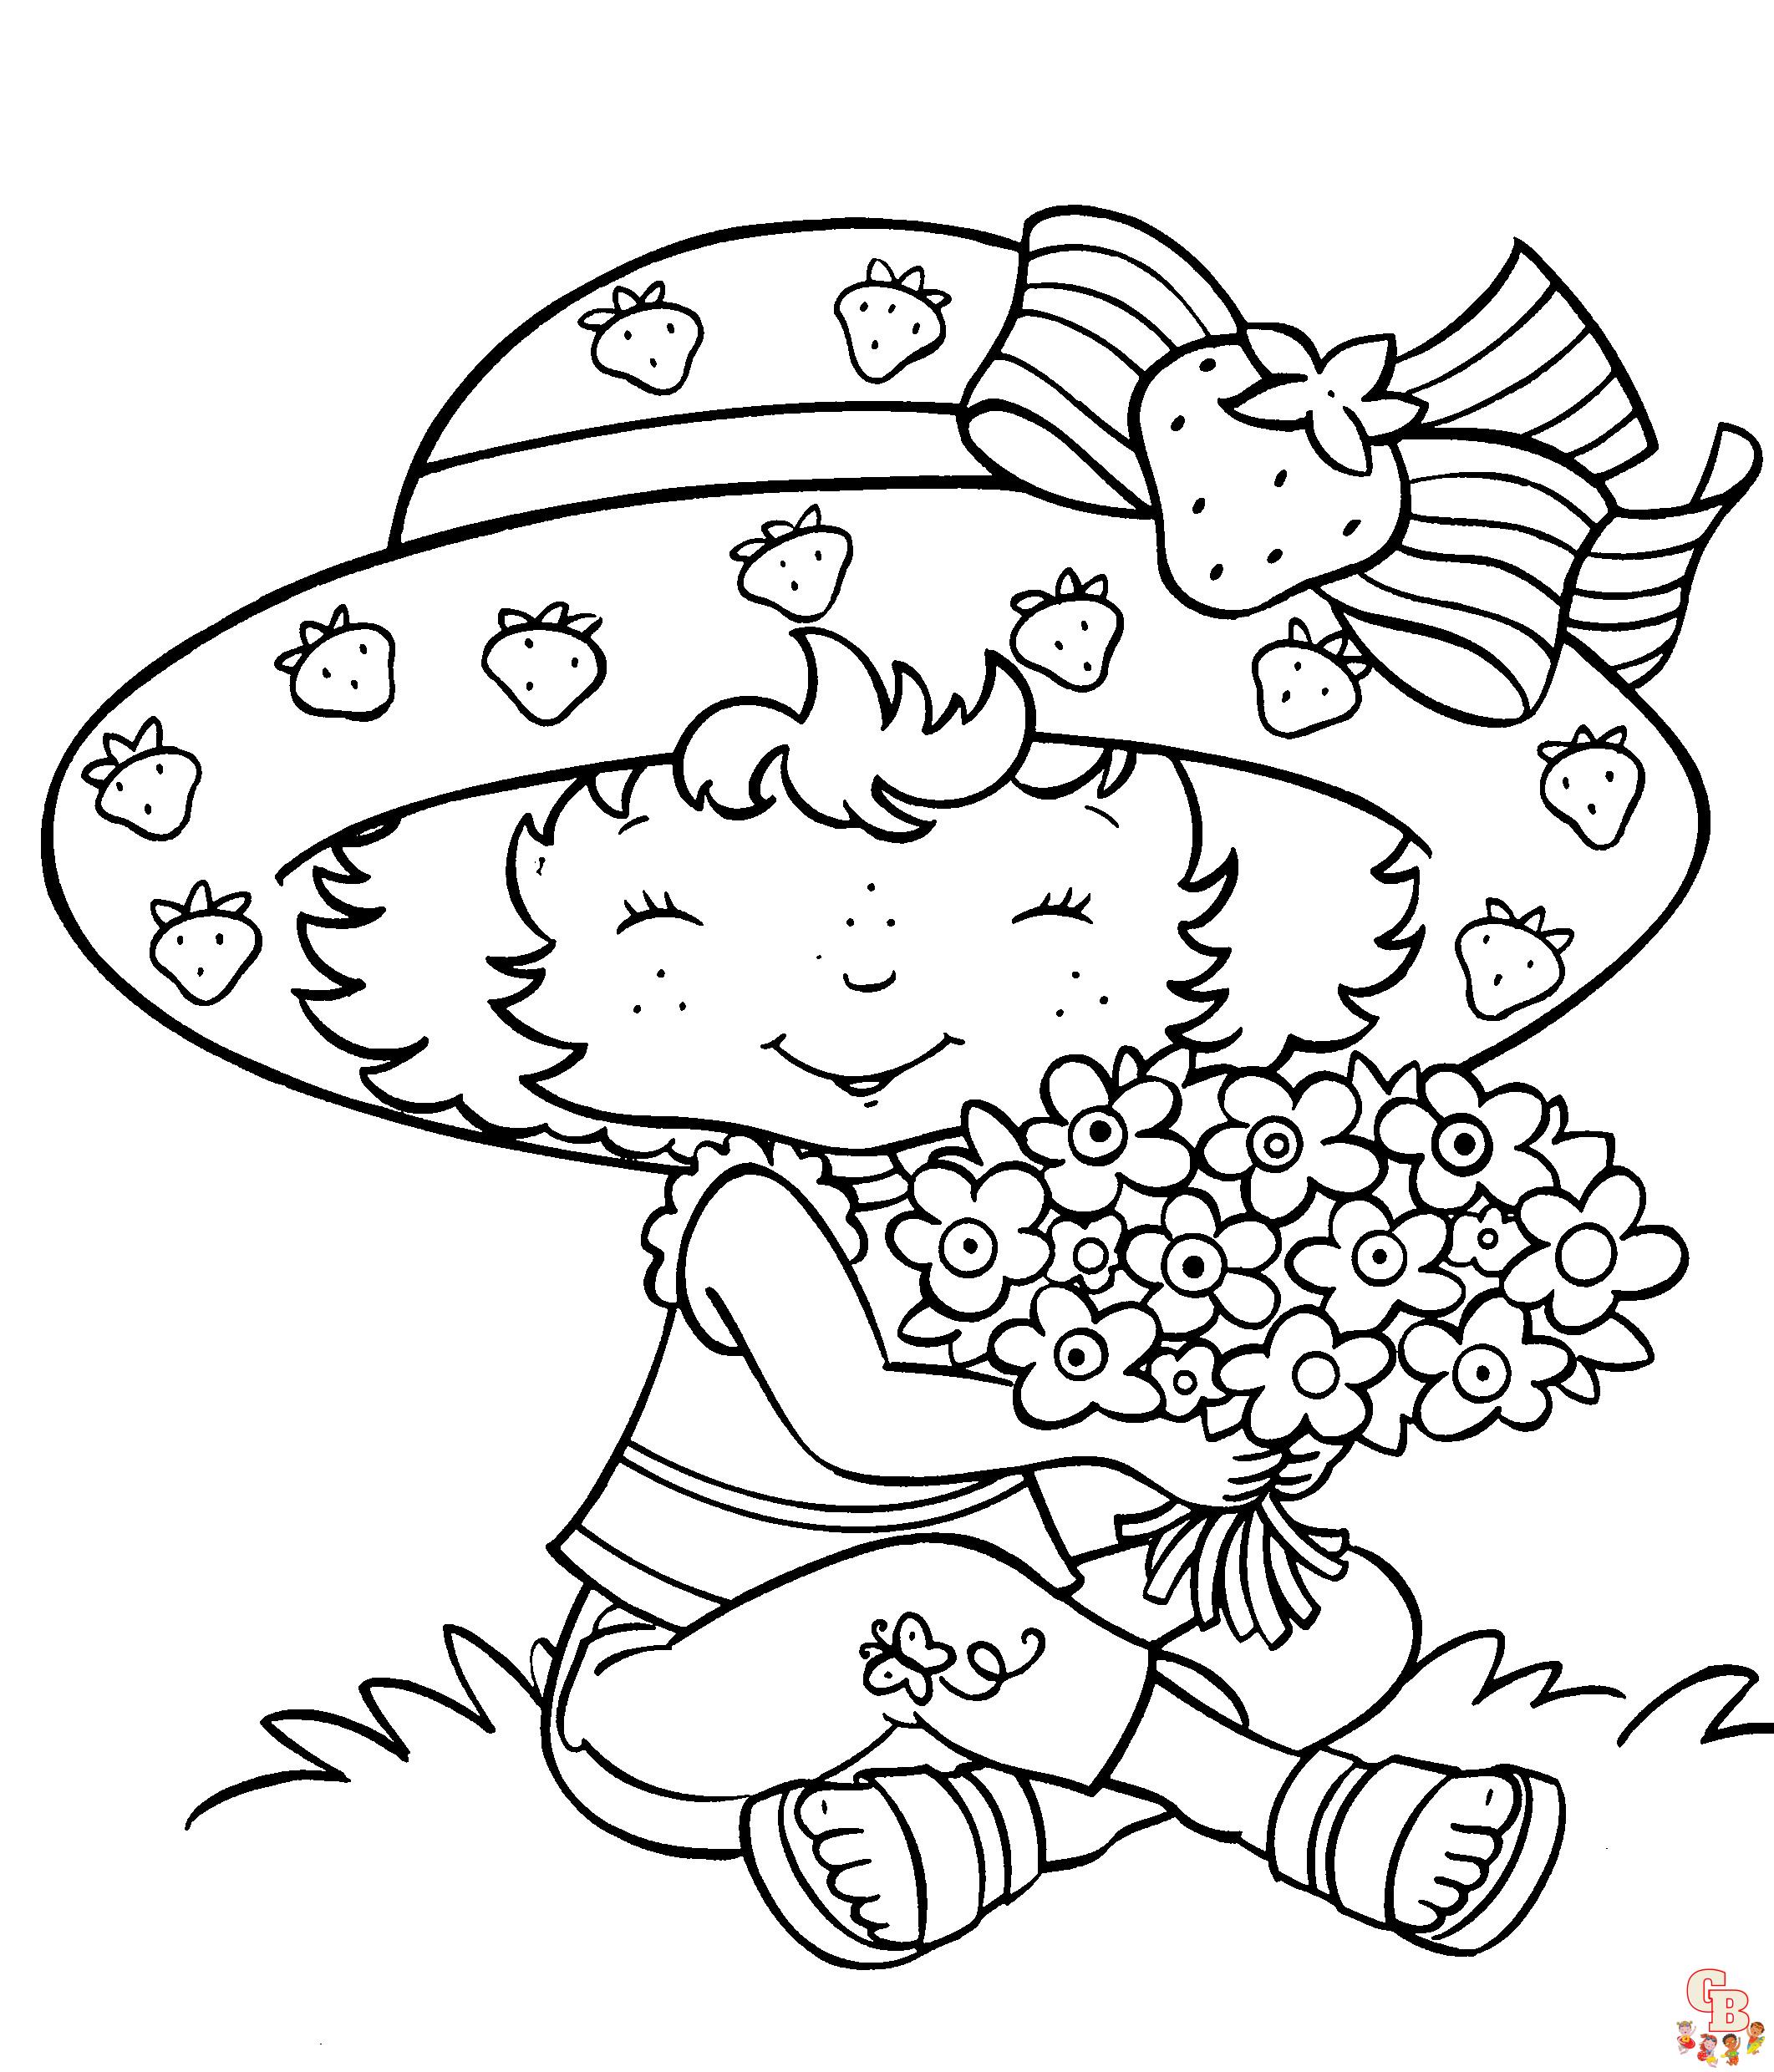 Strawberry Shortcake coloring pages for kids - Strawberry Shortcake Kids Coloring  Pages